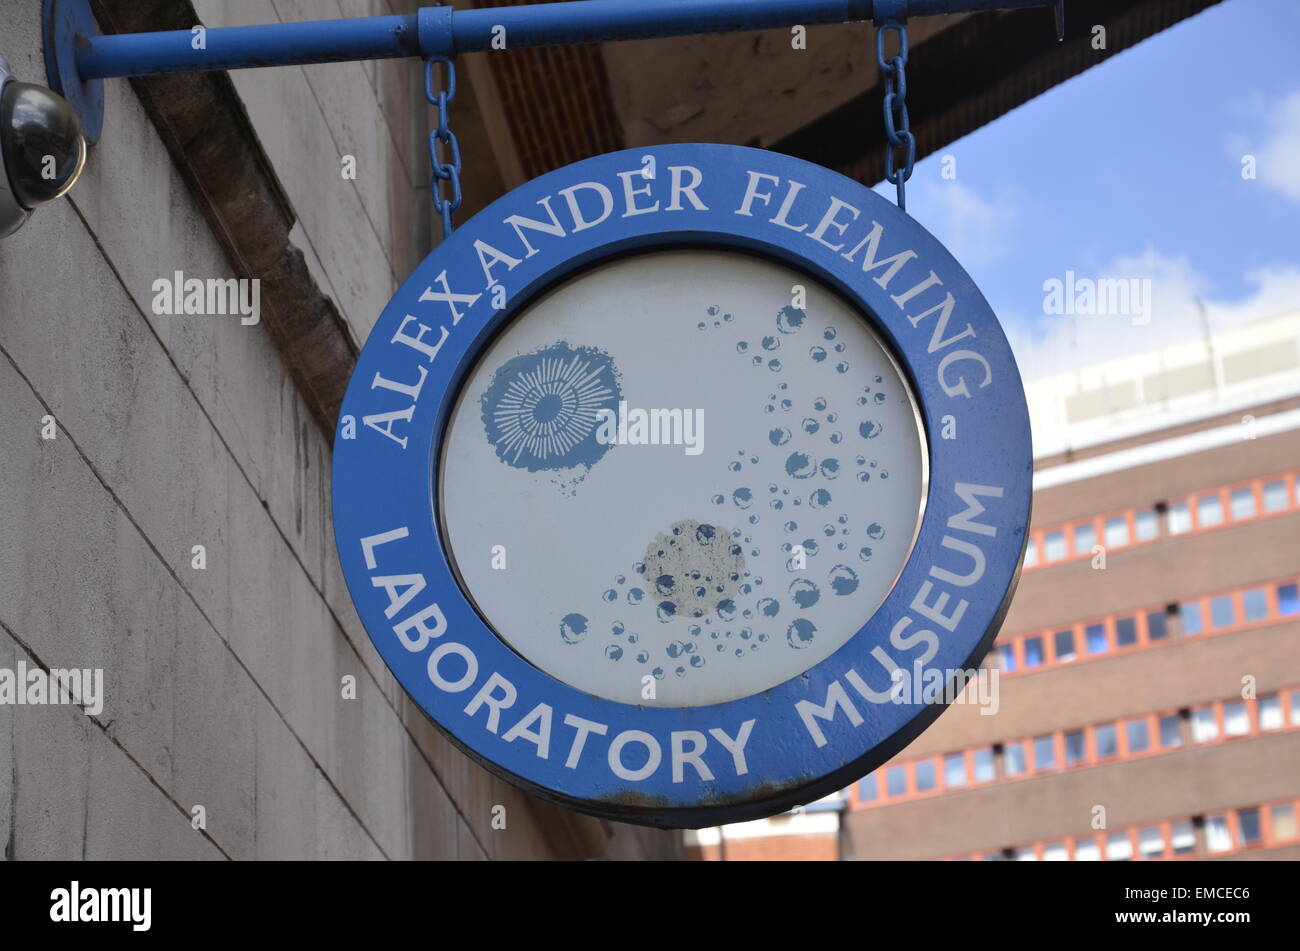 Alexander Fleming Laboratory Museum a St. Mary's Hospital Foto Stock